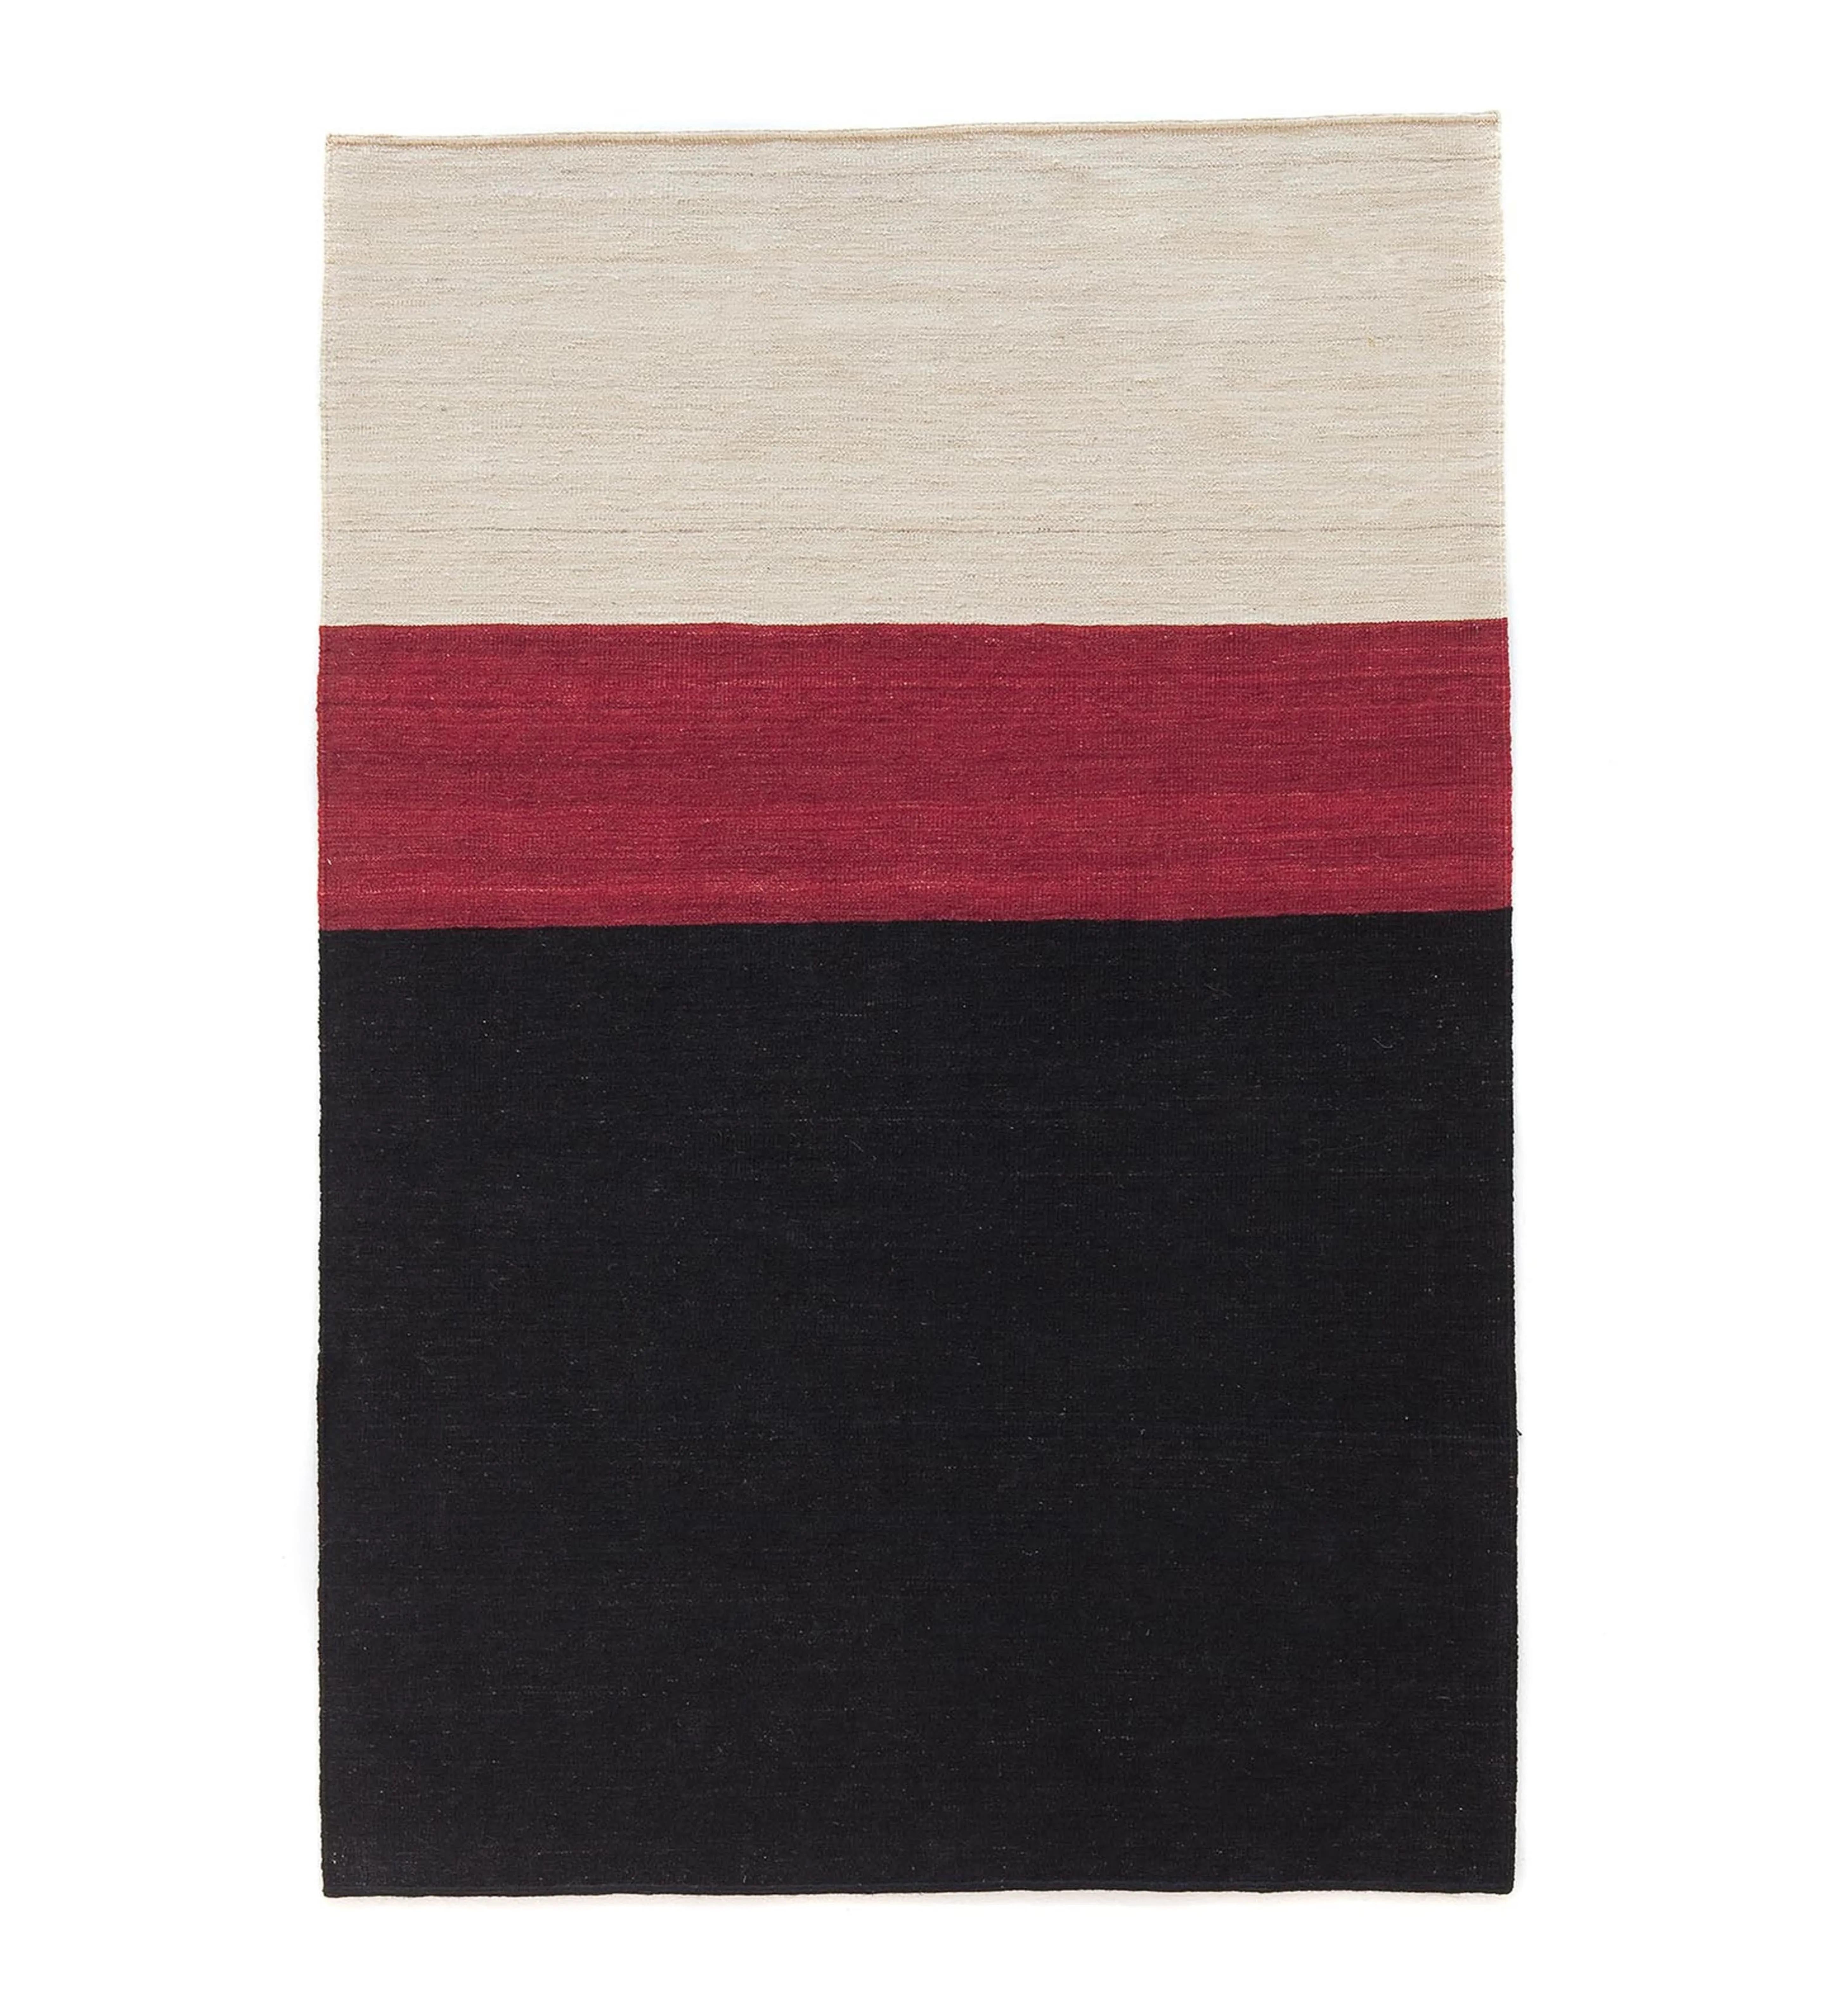 'Mélange Color 2' Hand-Loomed Rug by Sybilla for Nanimarquina For Sale 1